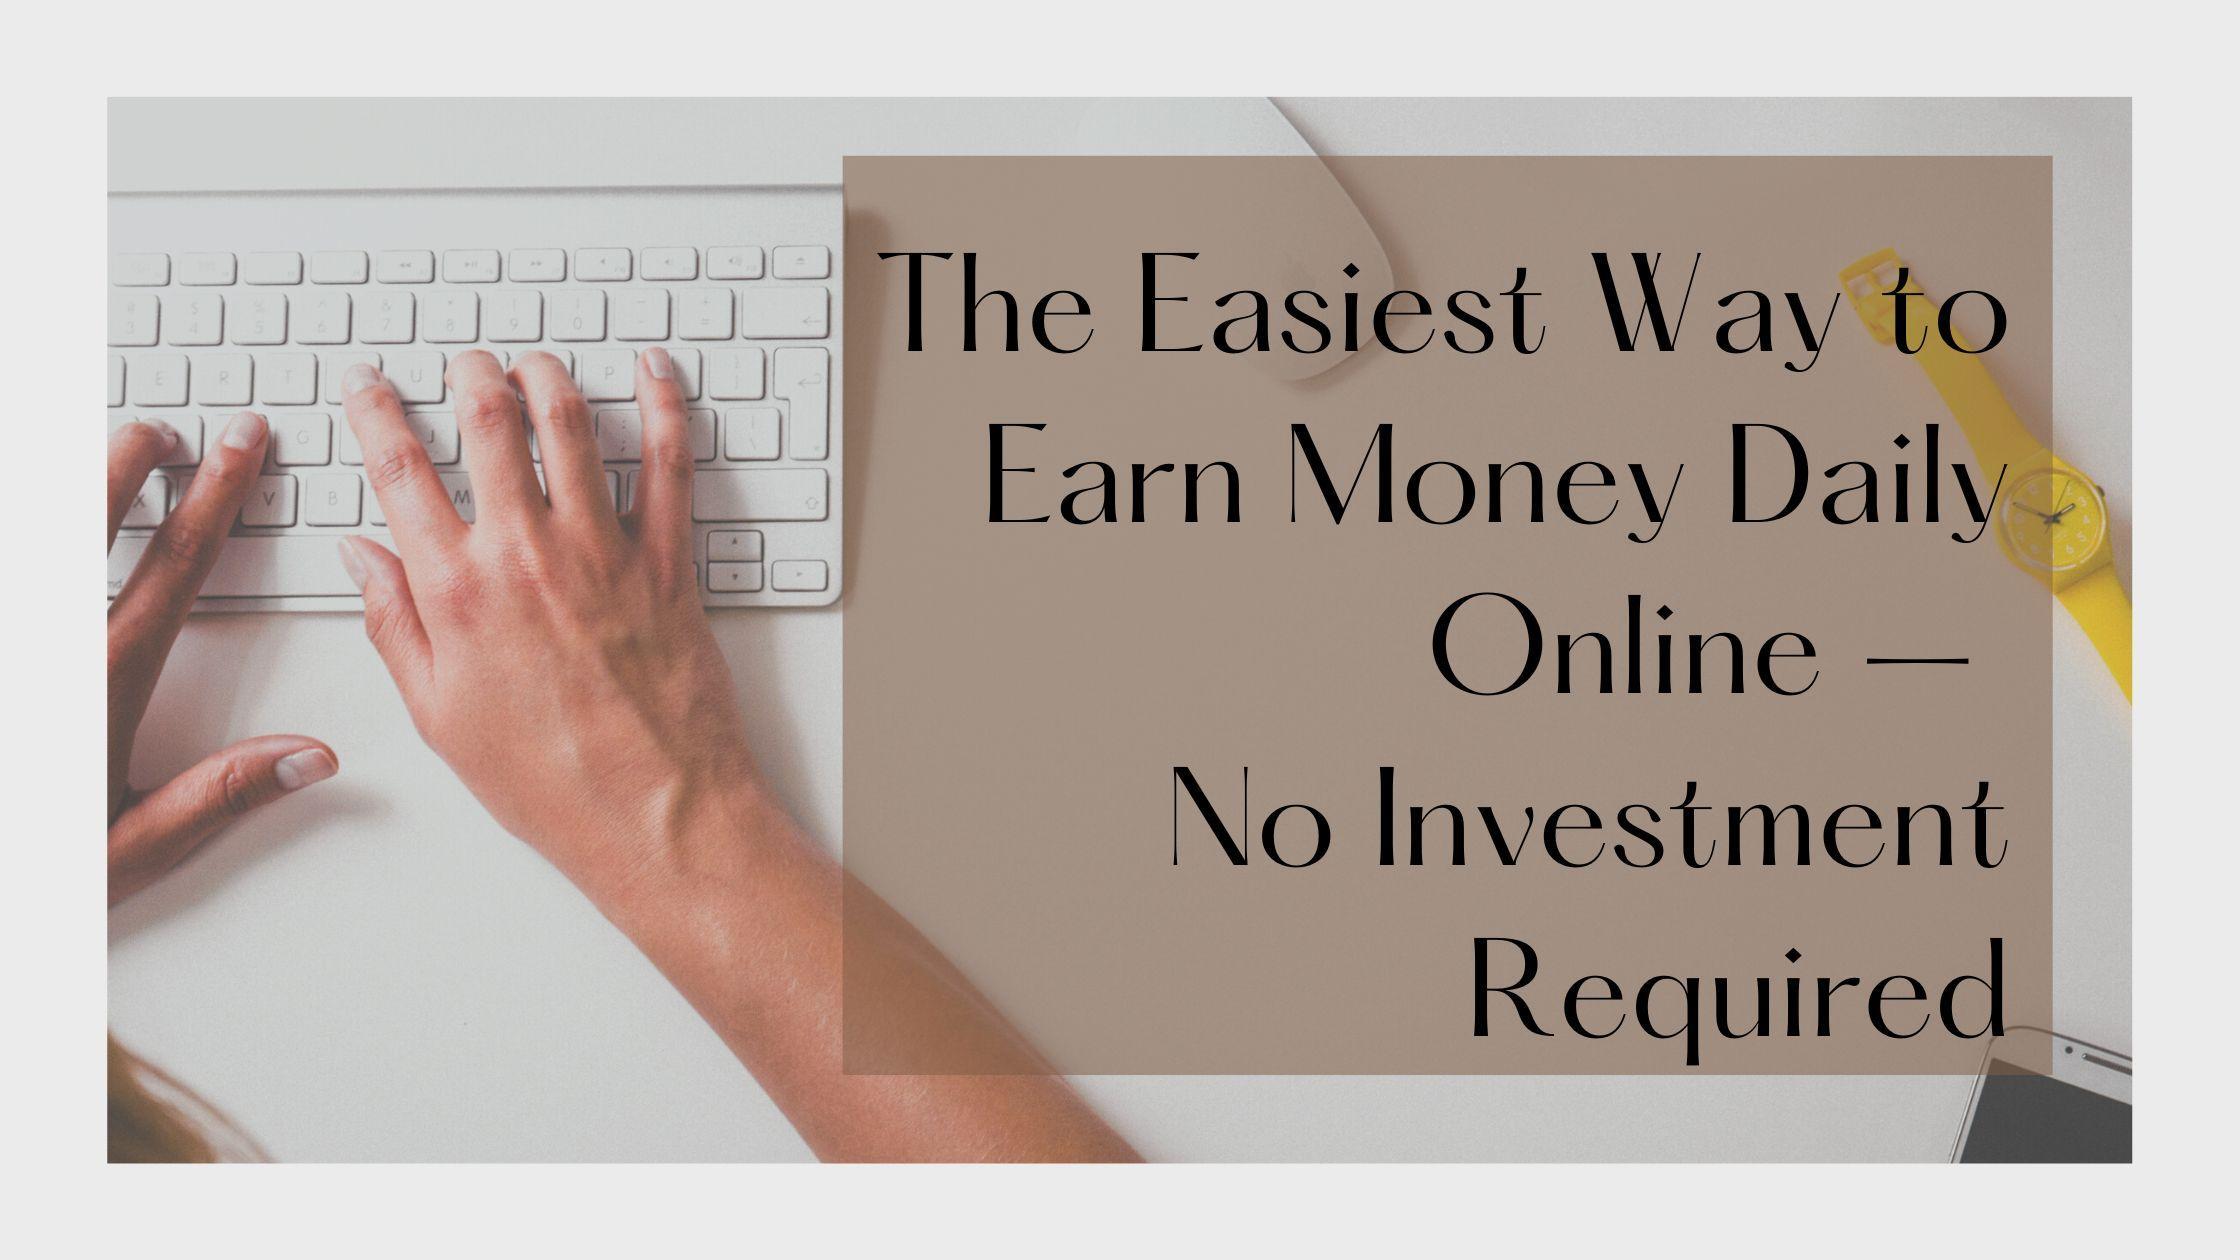 The Easiest Way to Know to Earn Money Daily Online – No Investment Required